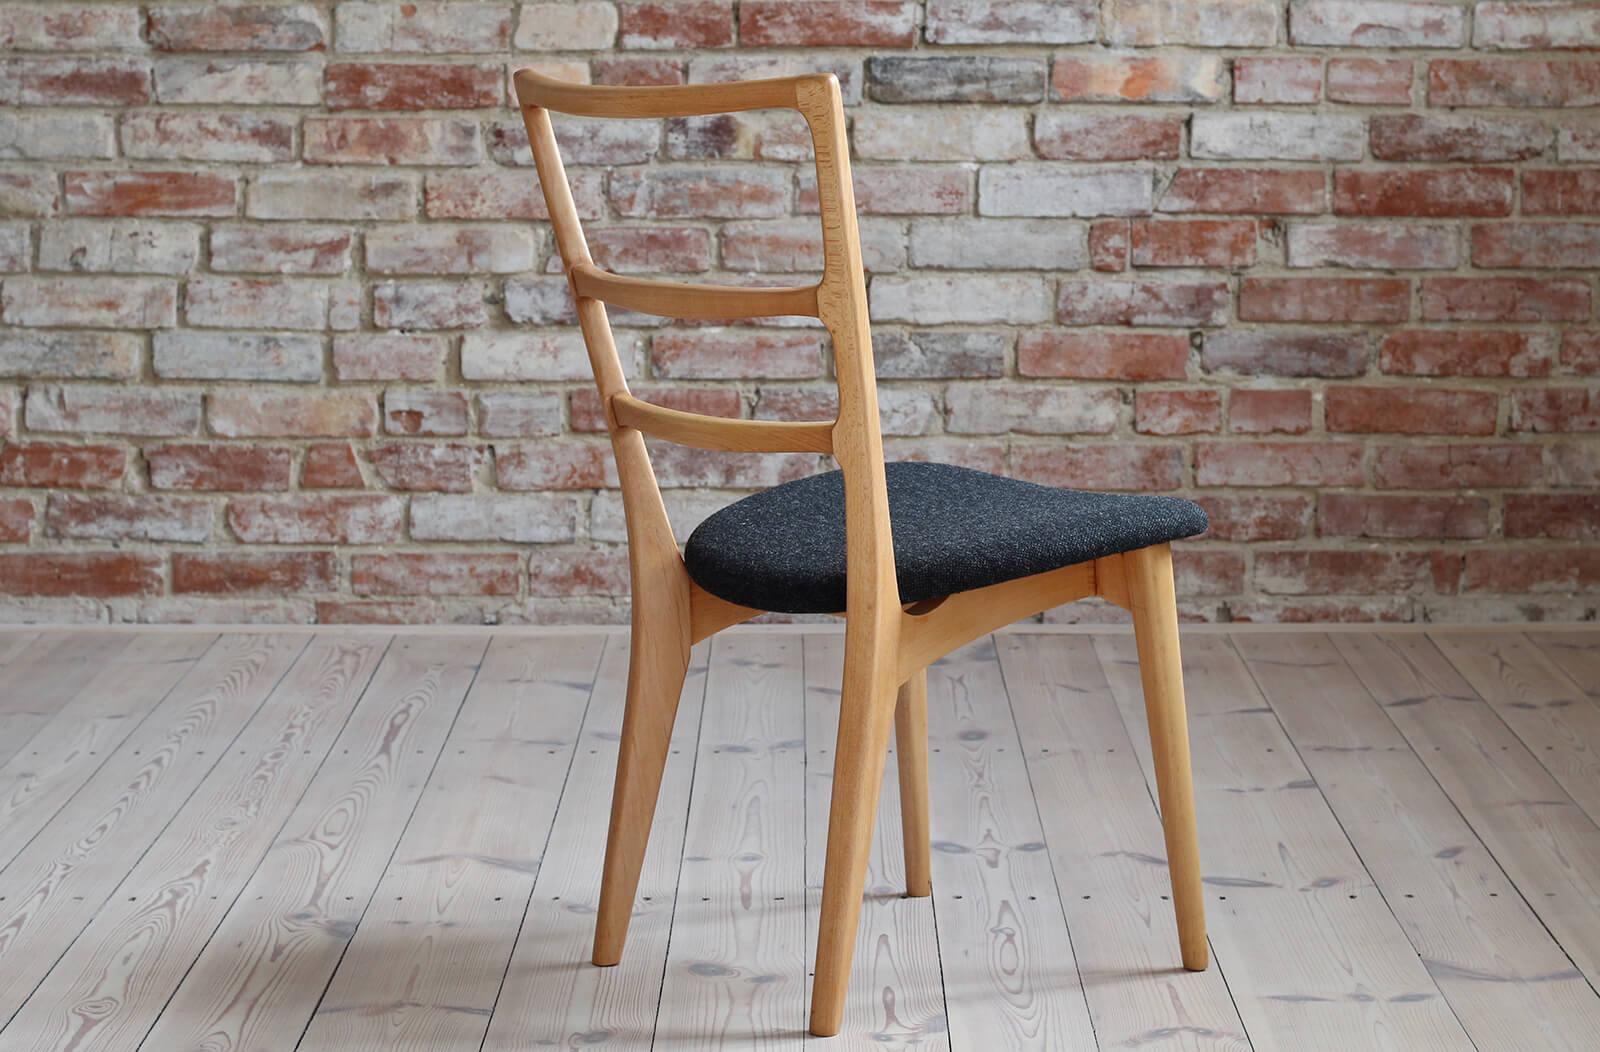 Oiled Set of 6 Dining Chairs by Marian Grabiński, Midcentury, Reupholstered in Kvadrat